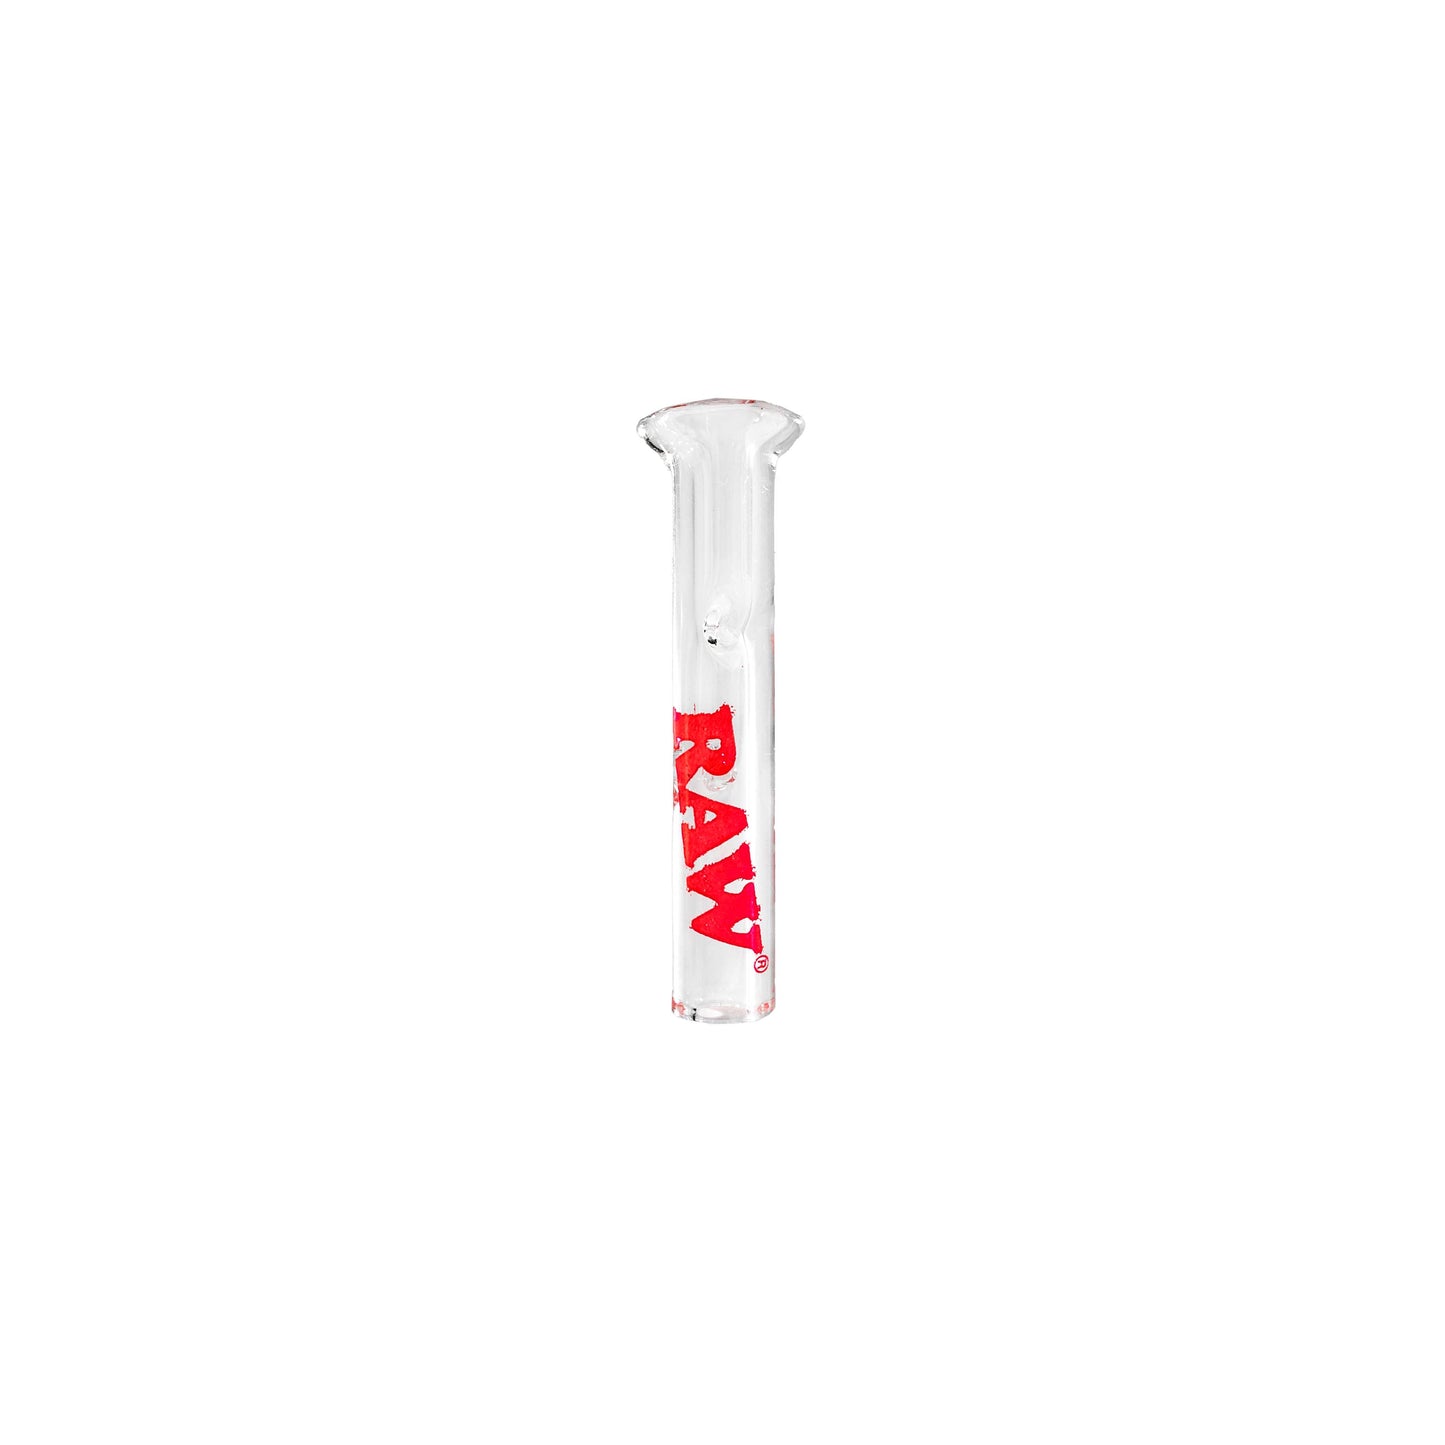 RAW Filter Tips - Reusable Glass Filter - - Filter Tips - RAW - Cali Tobacconist